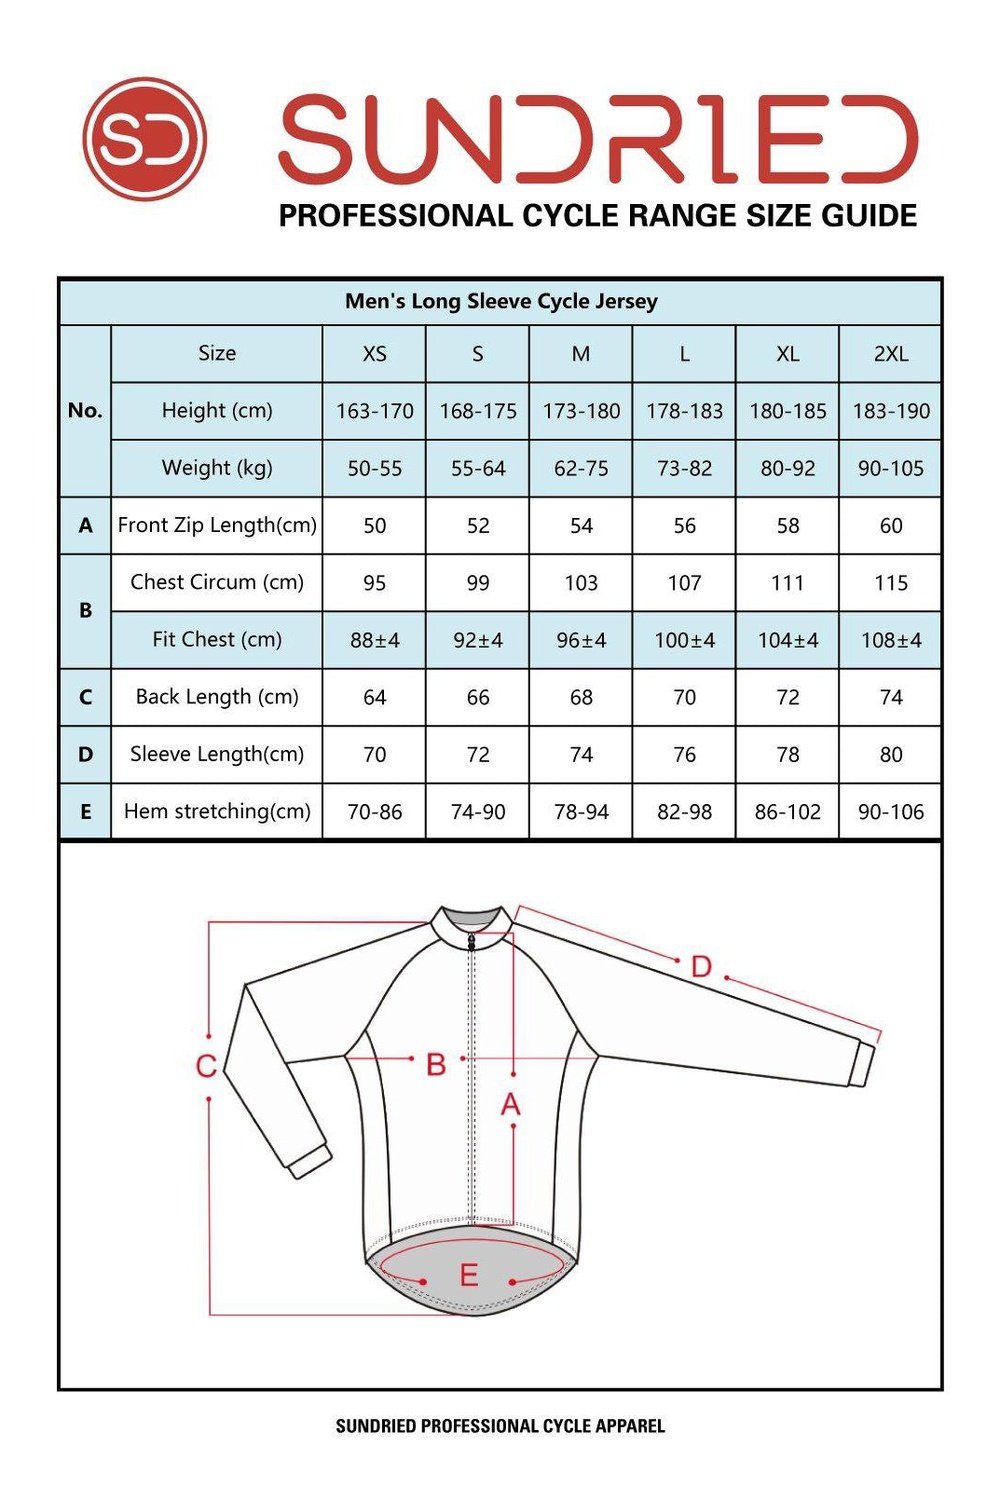 Sundried Spots and Stripes Men's Long Sleeve Cycle Jersey Long Sleeve Jersey Activewear